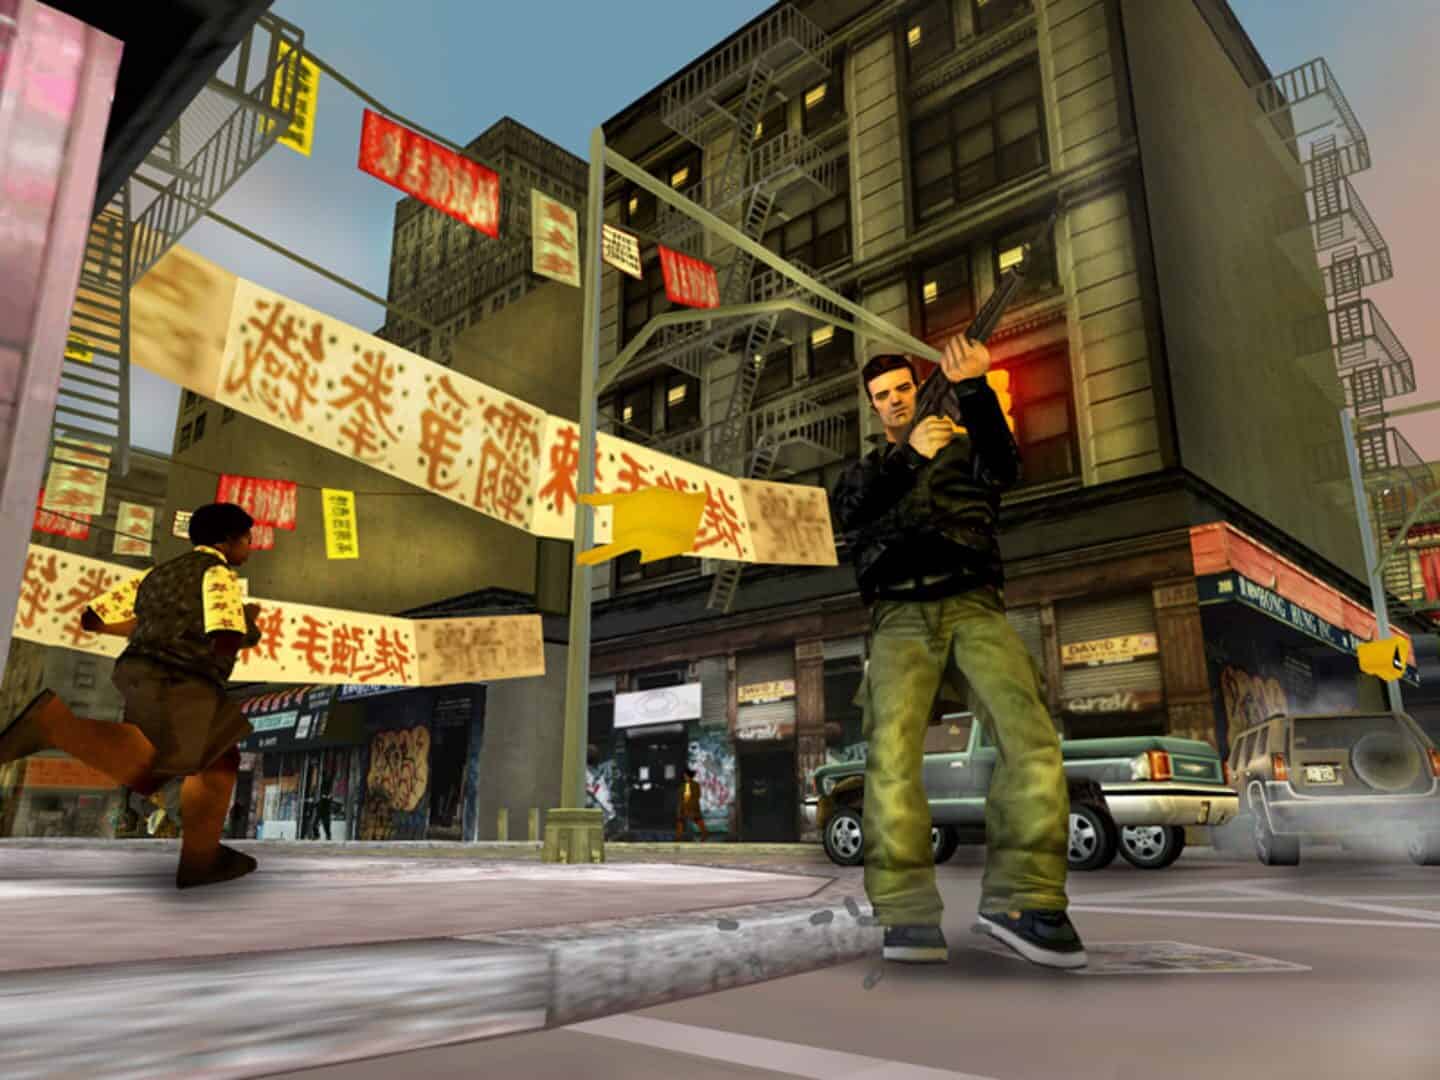 Steam Community :: Guide :: Grand Theft Auto: Liberty City Stories